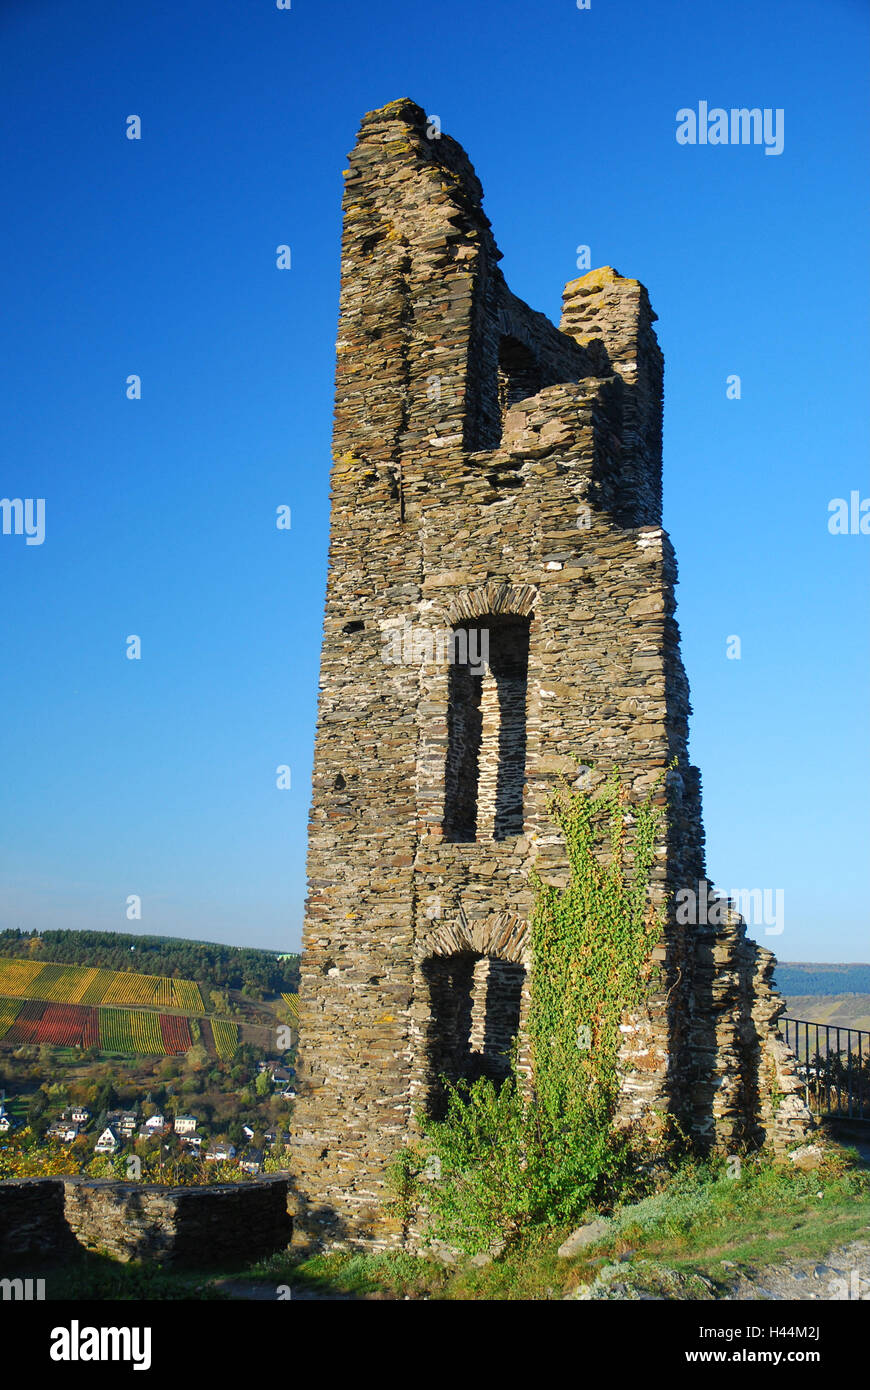 Germany, Rhineland-Palatinate, the Moselle, Traben-Trarbach, castle Greven, ruin, Stock Photo